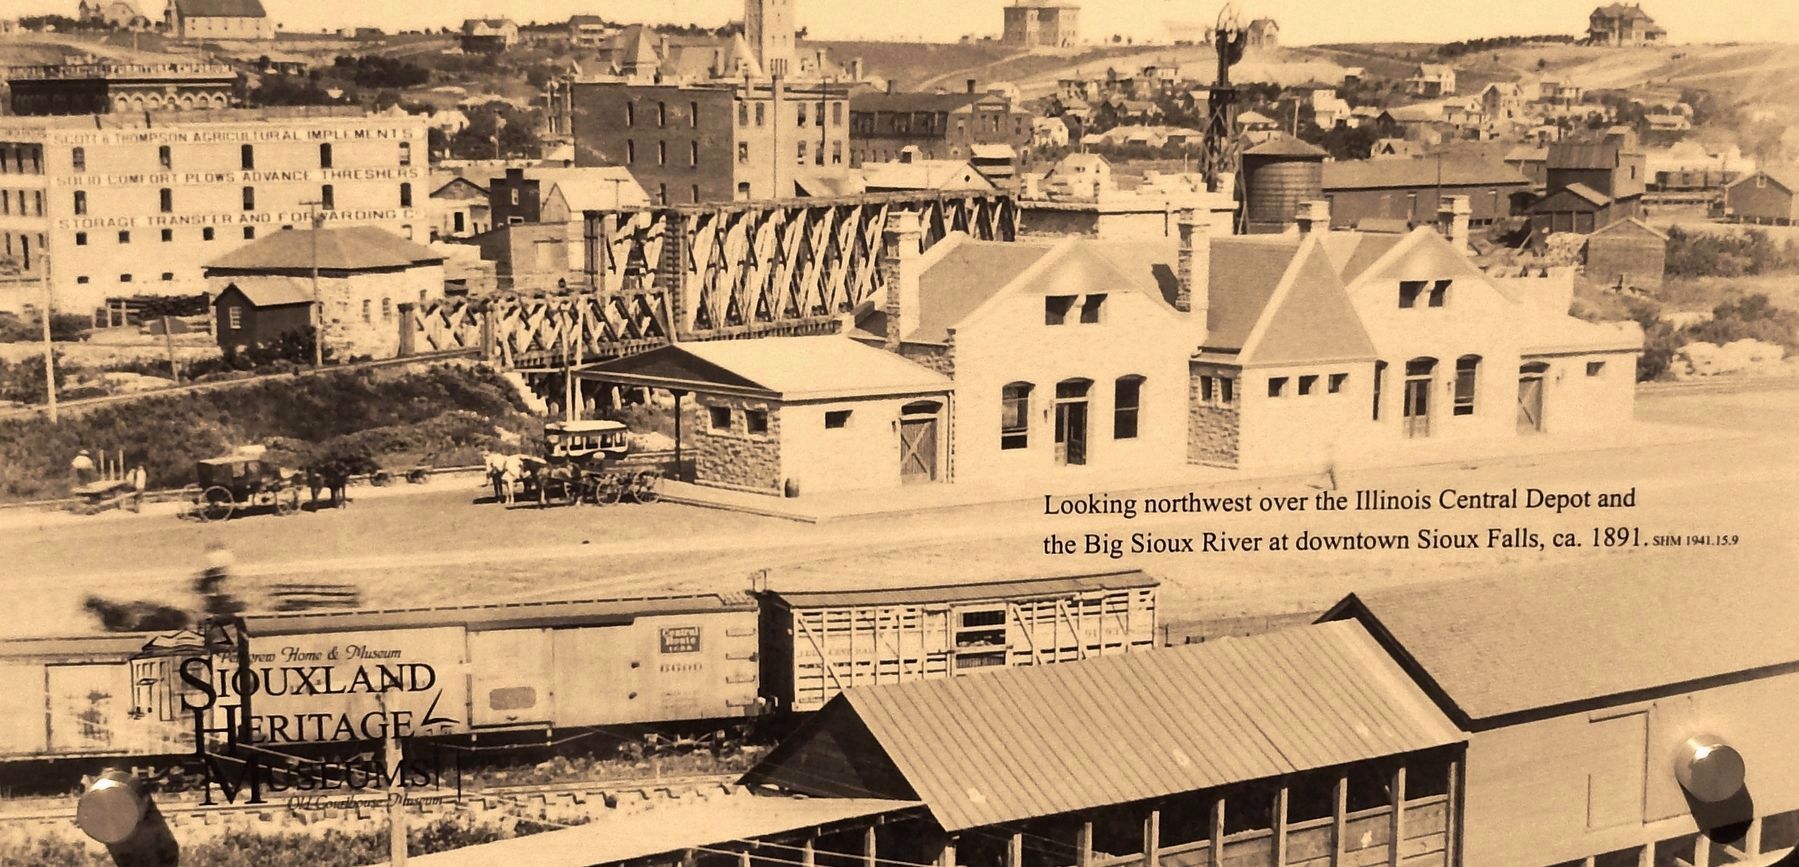 Marker detail: Illinois Central Depot, Big Sioux River, and downtown Sioux Falls, ca. 1891 image. Click for full size.